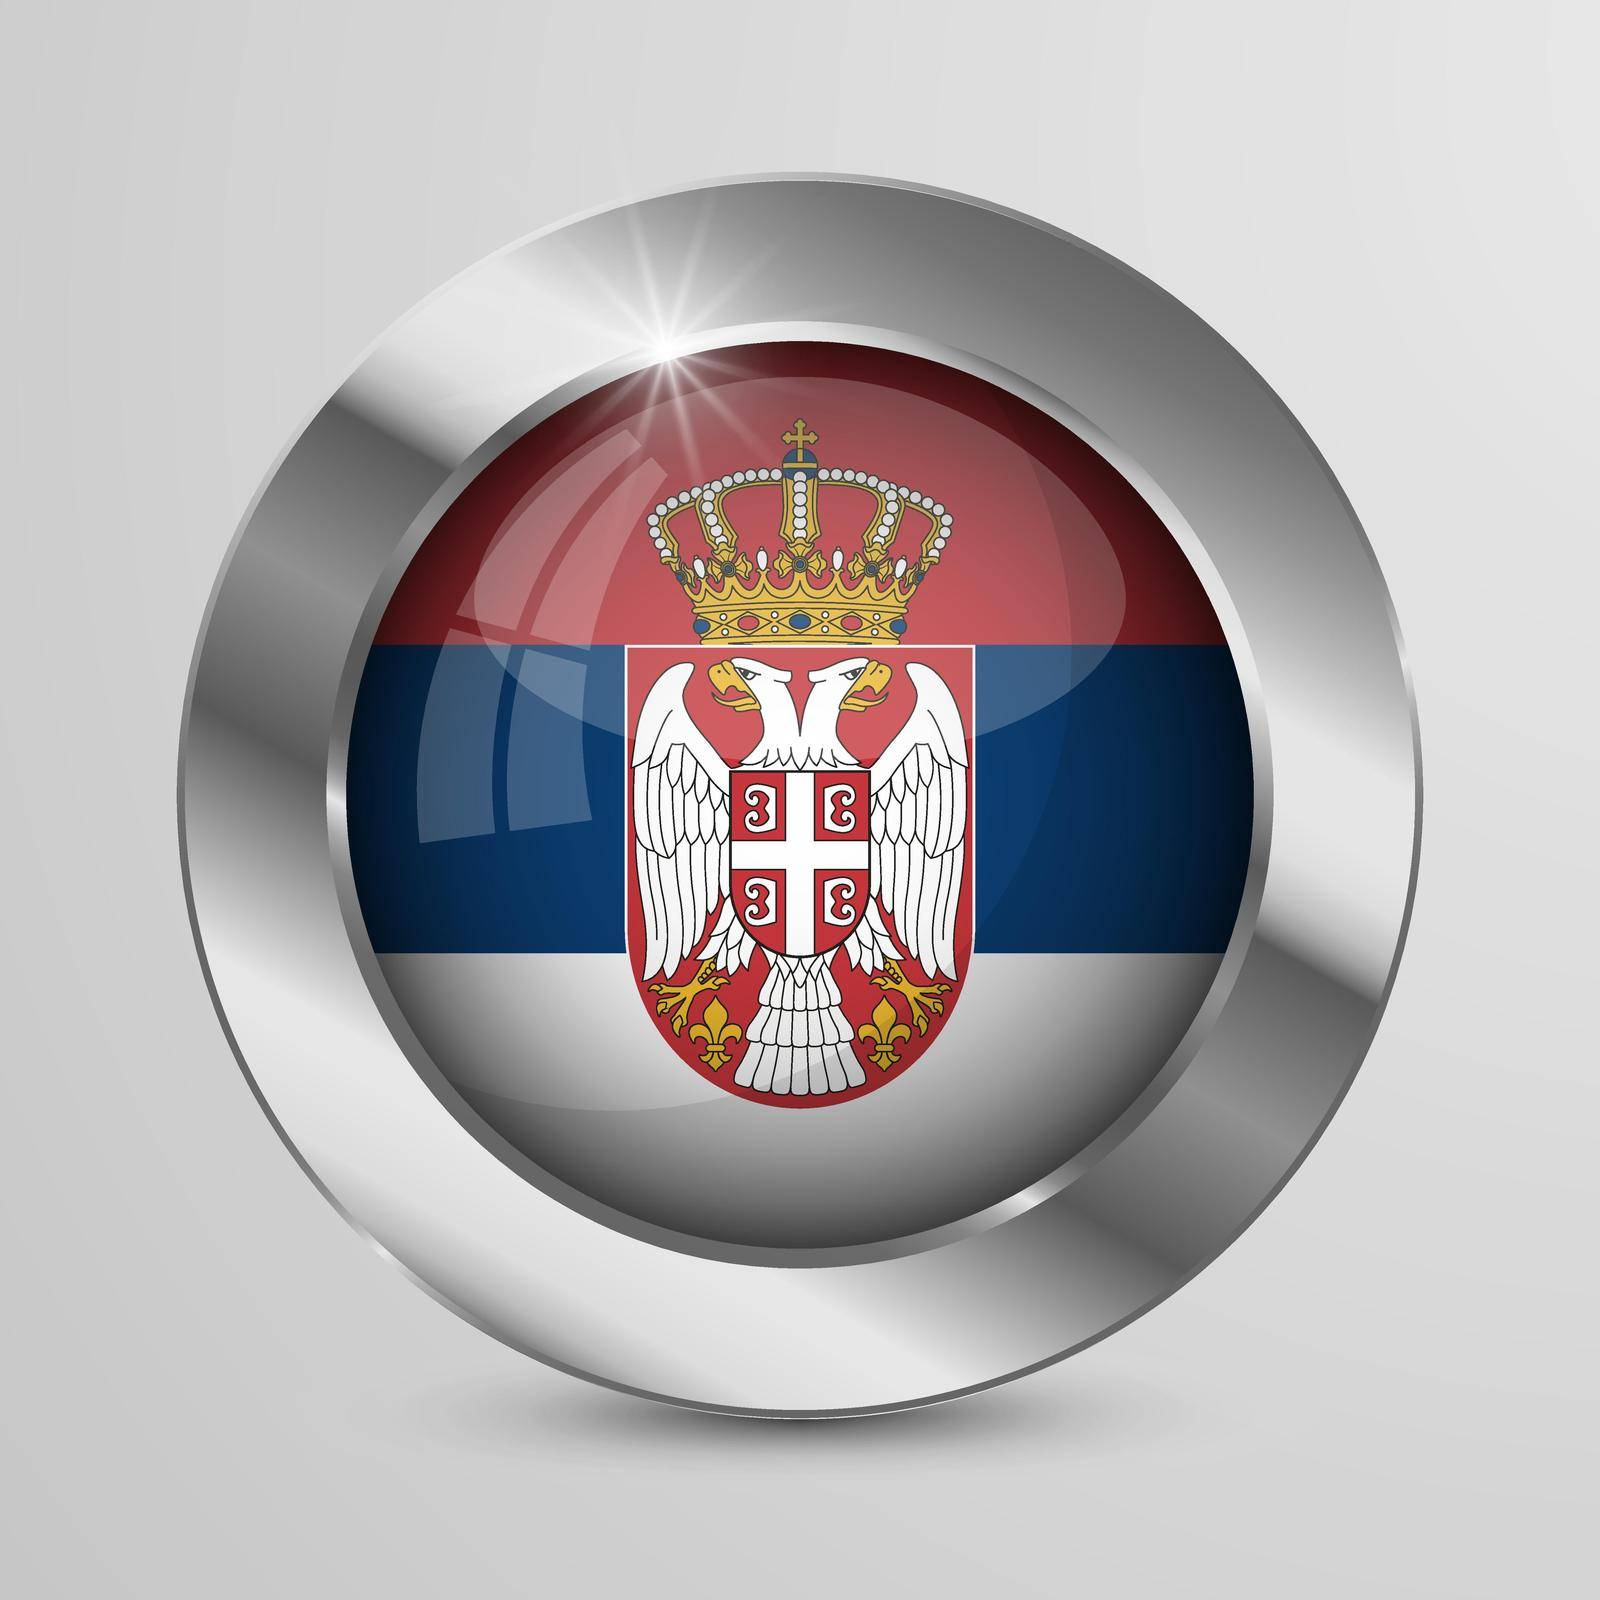 EPS10 Vector Patriotic Button with Serbia flag colors. An element of impact for the use you want to make of it.